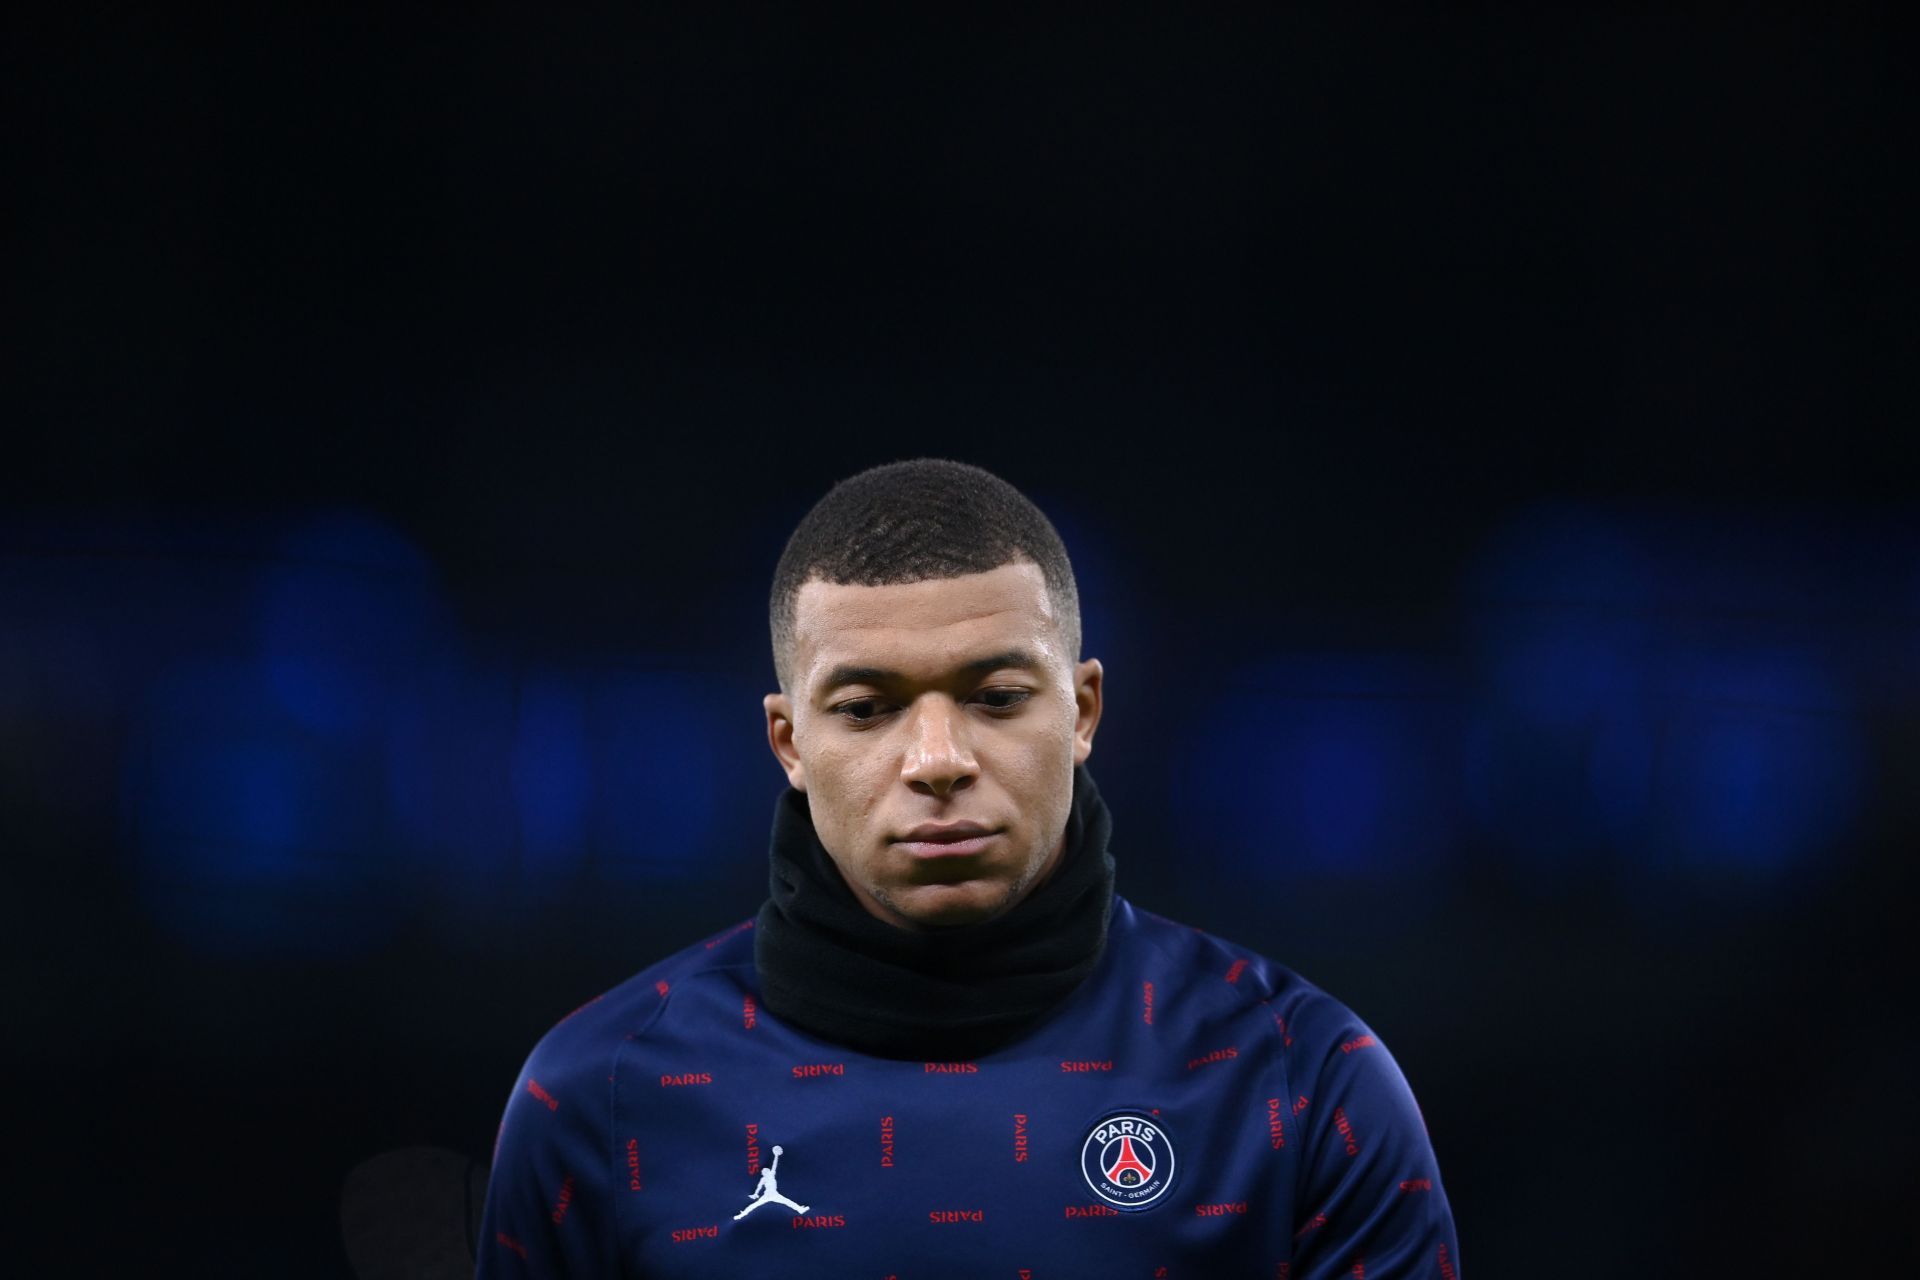 PSG will look to Kylian Mbappe for inspiration against Club Brugge.